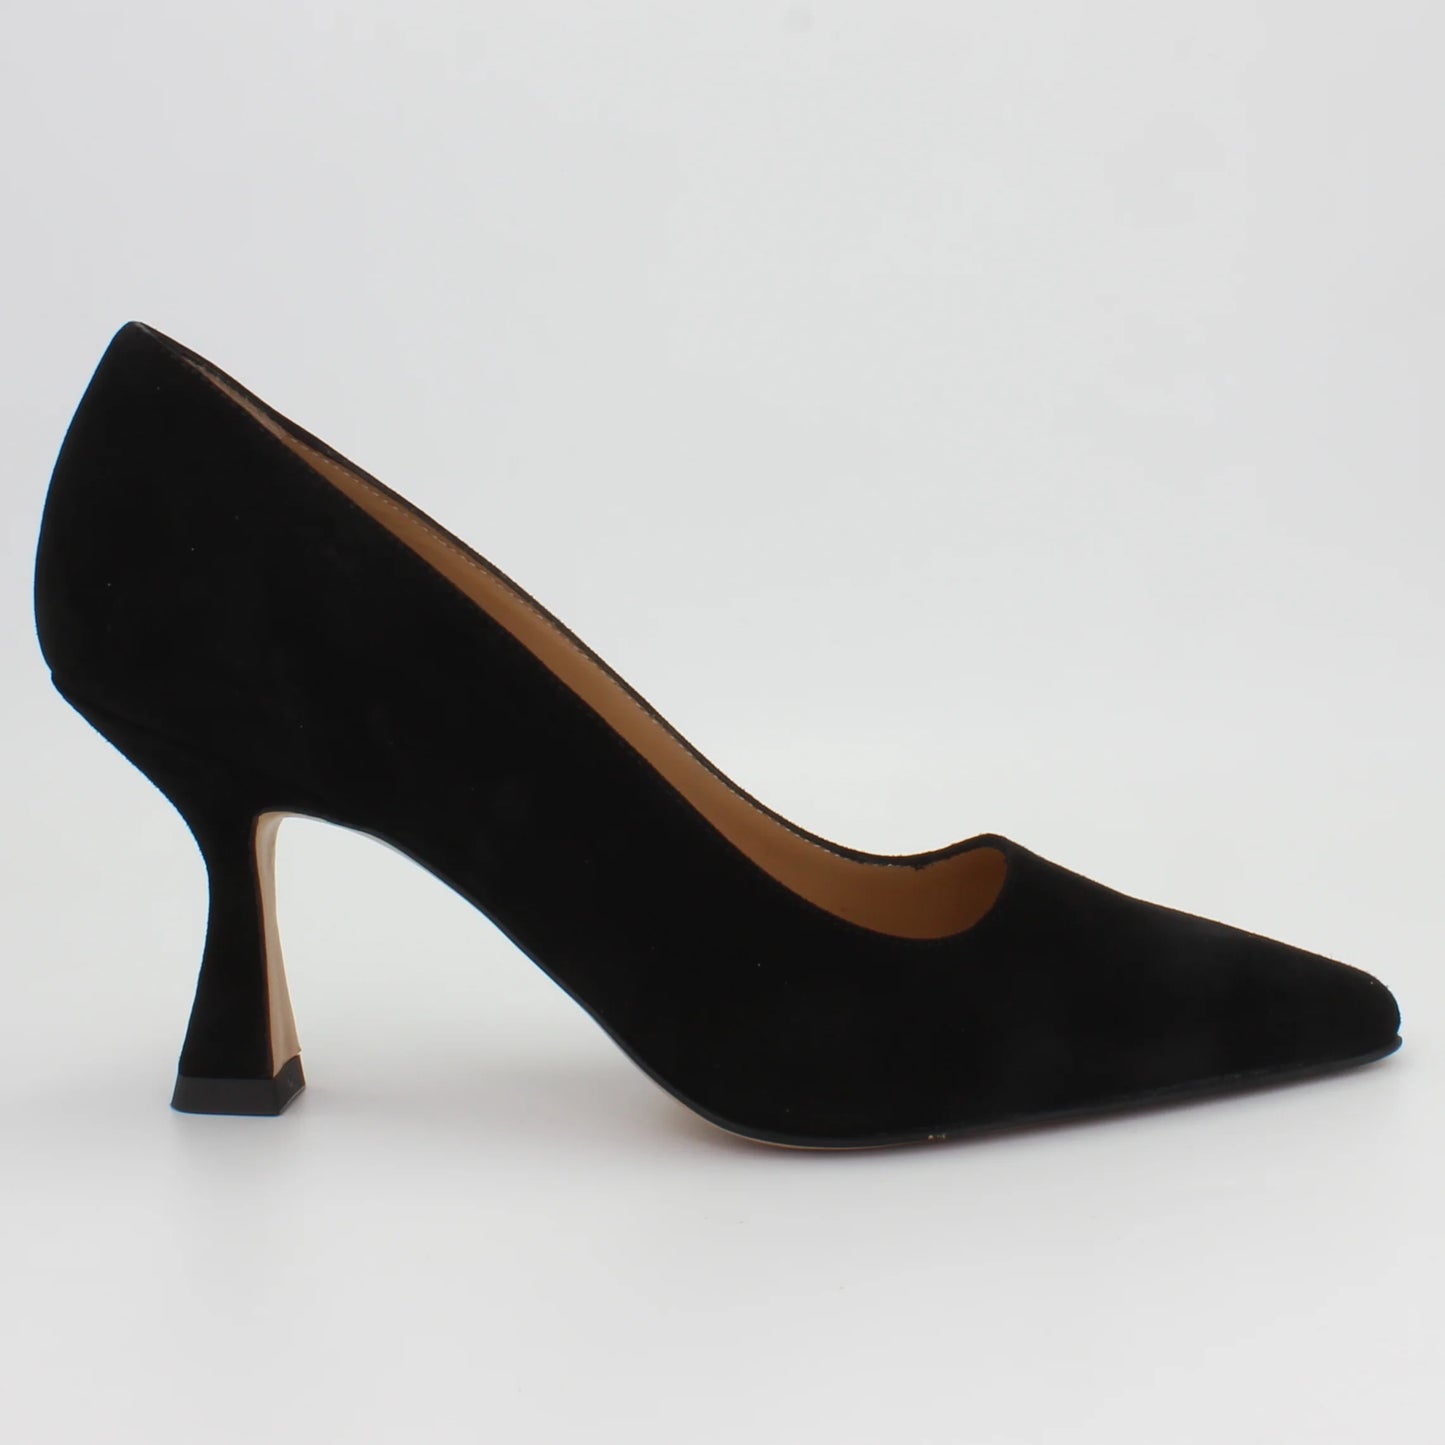 Shop Handmade Italian Leather Suede Heel in Nero (V51) or browse our range of hand-made Italian shoes for women in leather or suede in-store at Aliverti Cape Town, or shop online. We deliver in South Africa & offer multiple payment plans as well as accept multiple safe & secure payment methods.